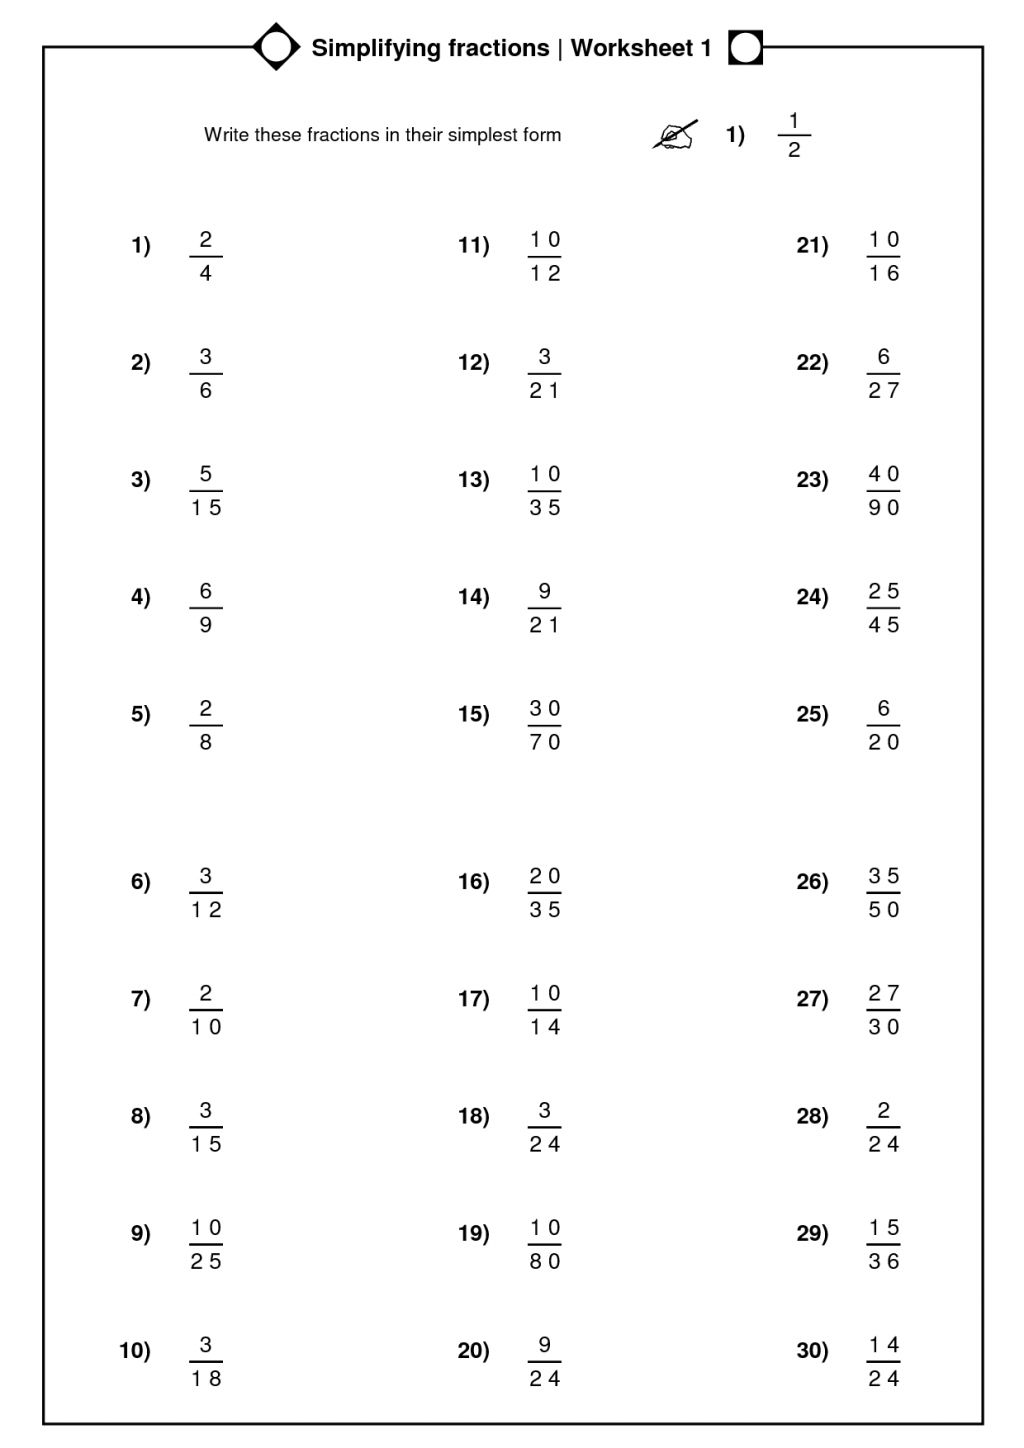 simplifying-fractions-worksheet-with-answers-db-excel